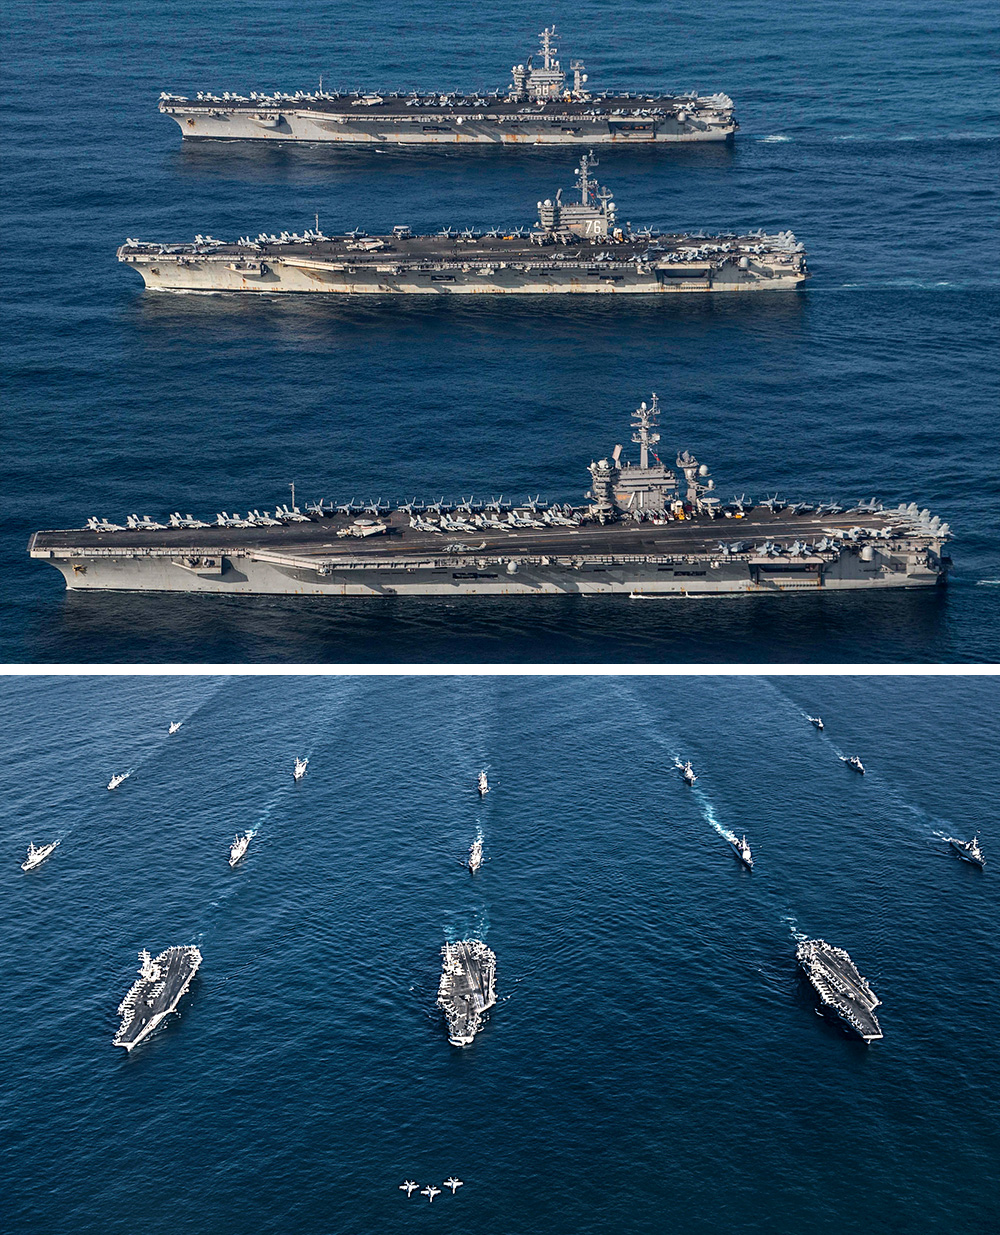 Three fighter aircraft fly in formation over three aircraft carriers in the ocean.